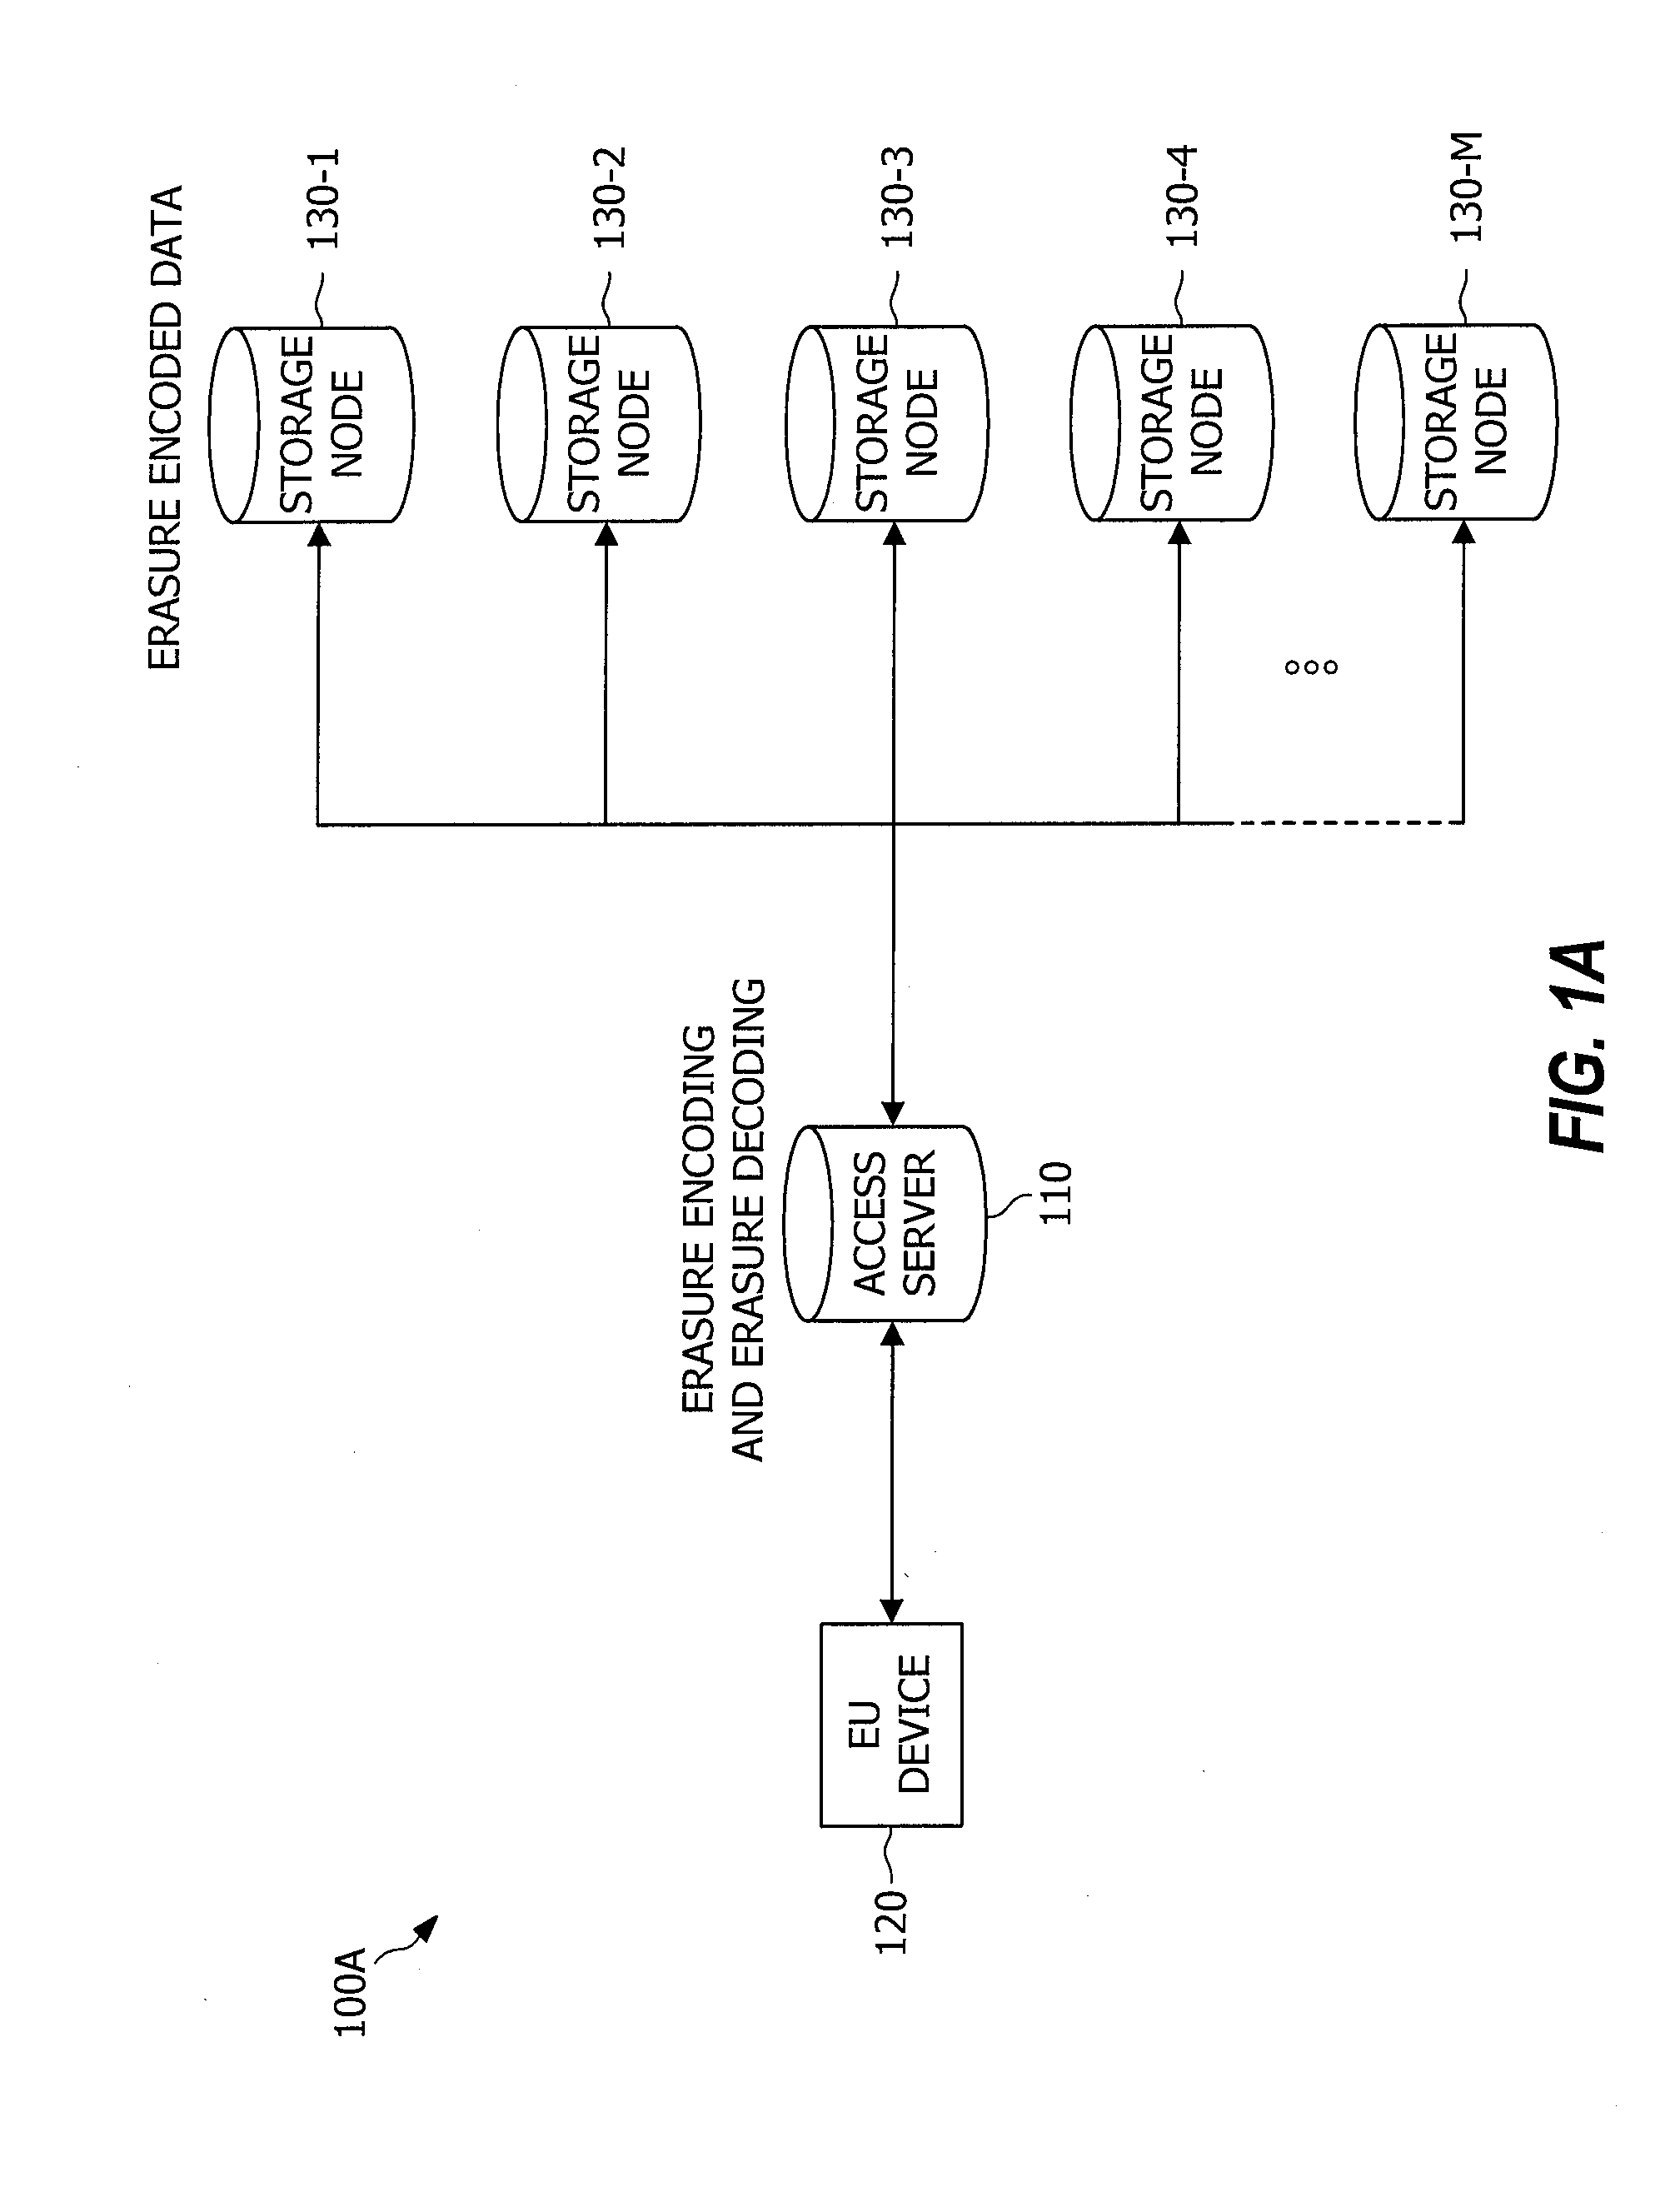 Systems and mehtods for reliably storing data using liquid distributed storage